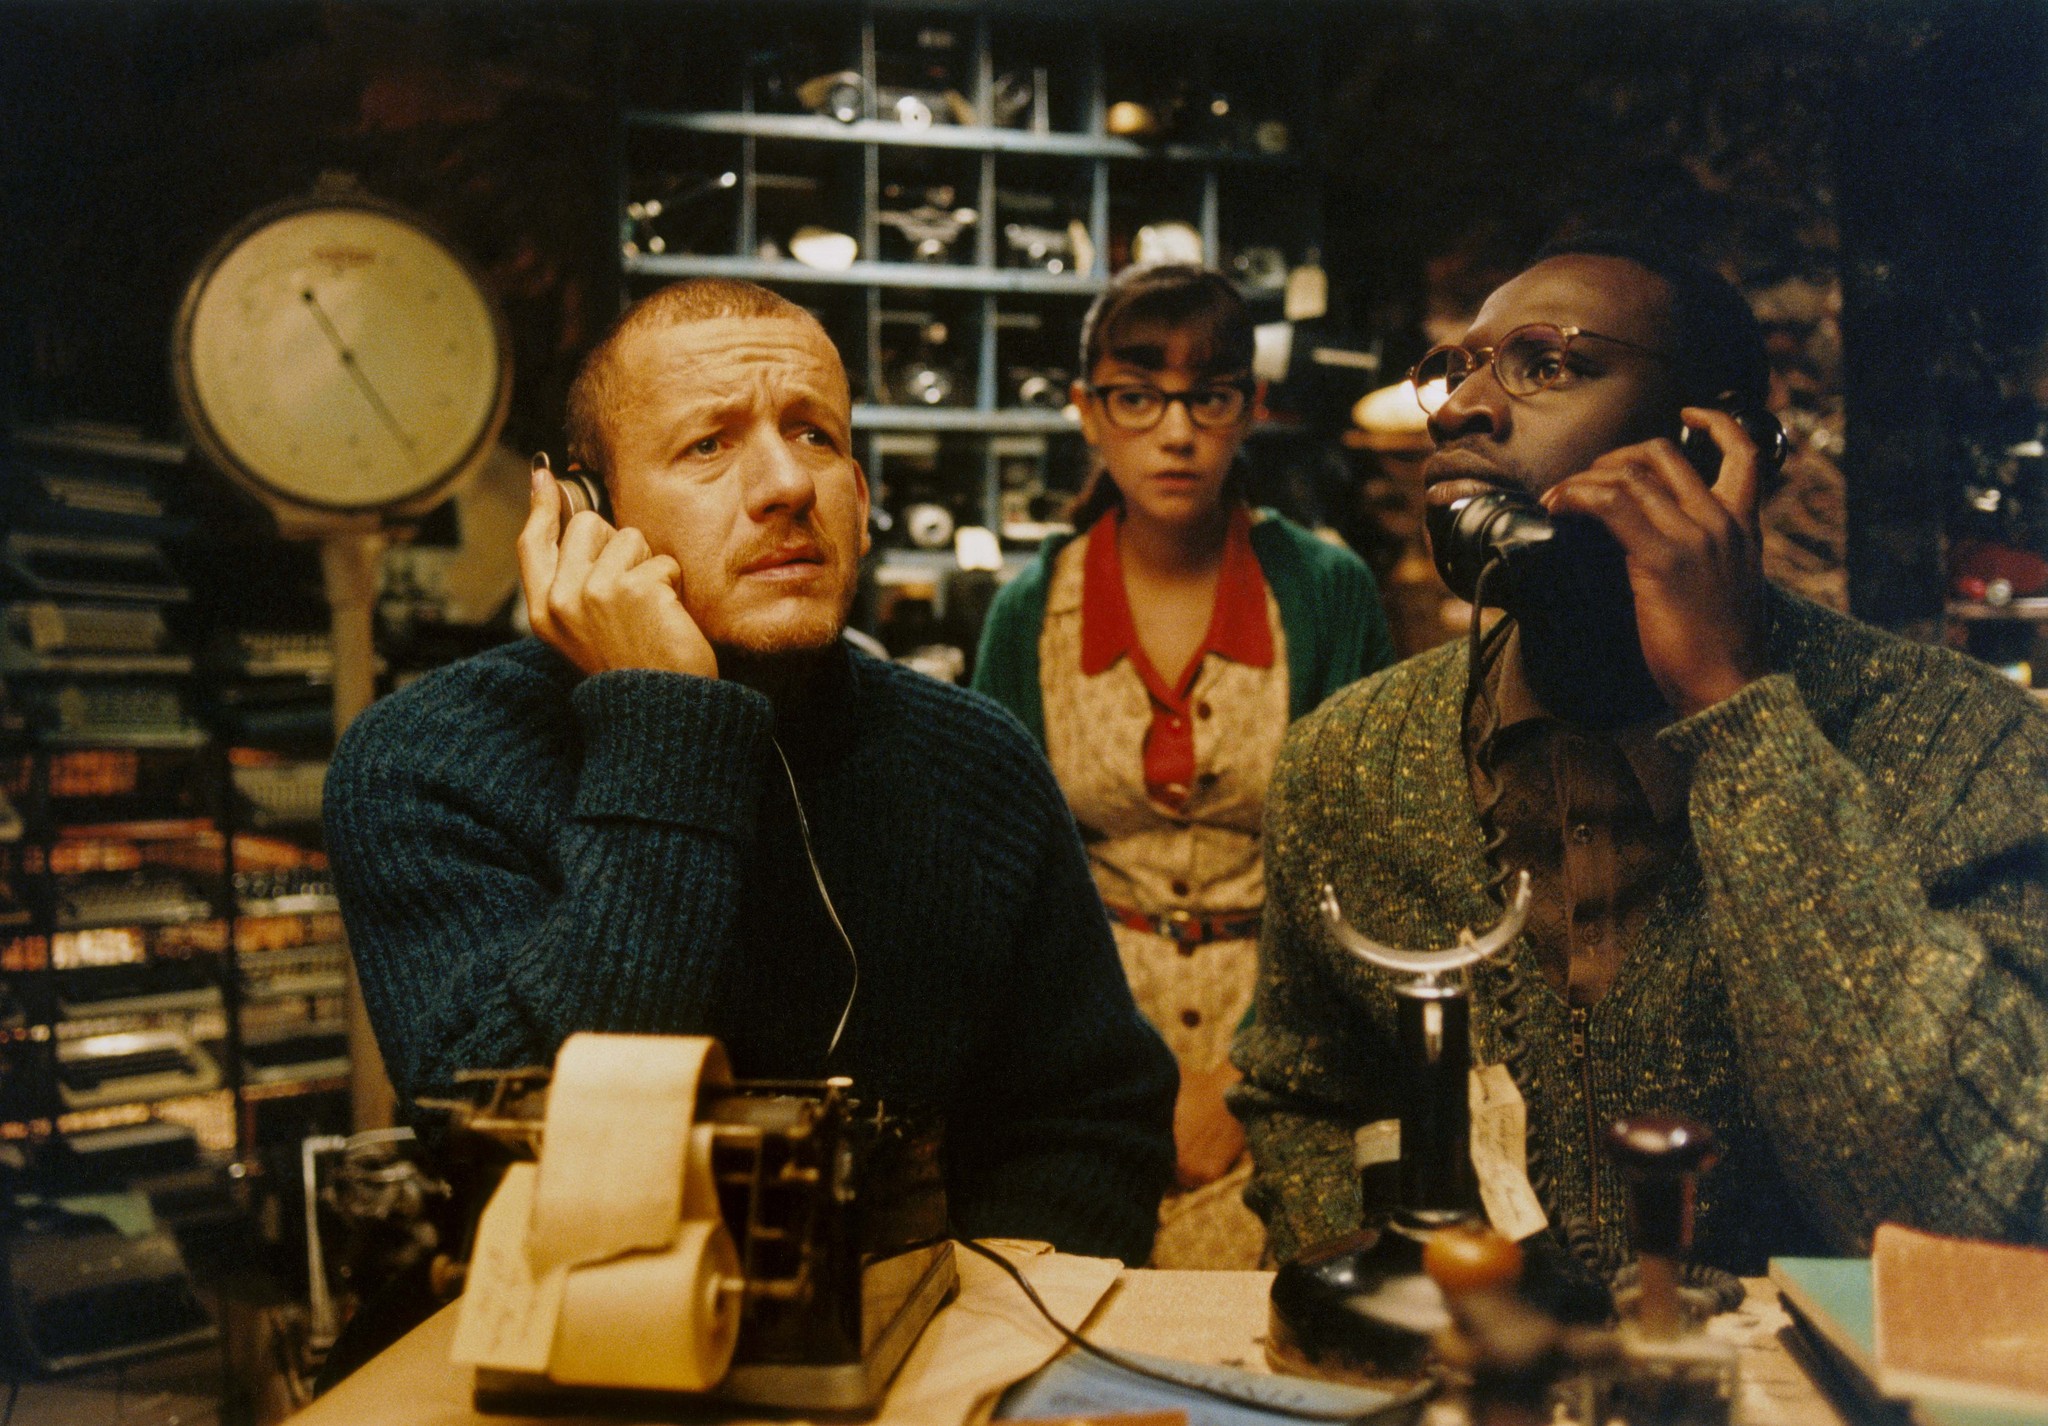 Still of Dany Boon, Omar Sy and Marie-Julie Baup in Micmacs à tire-larigot (2009)